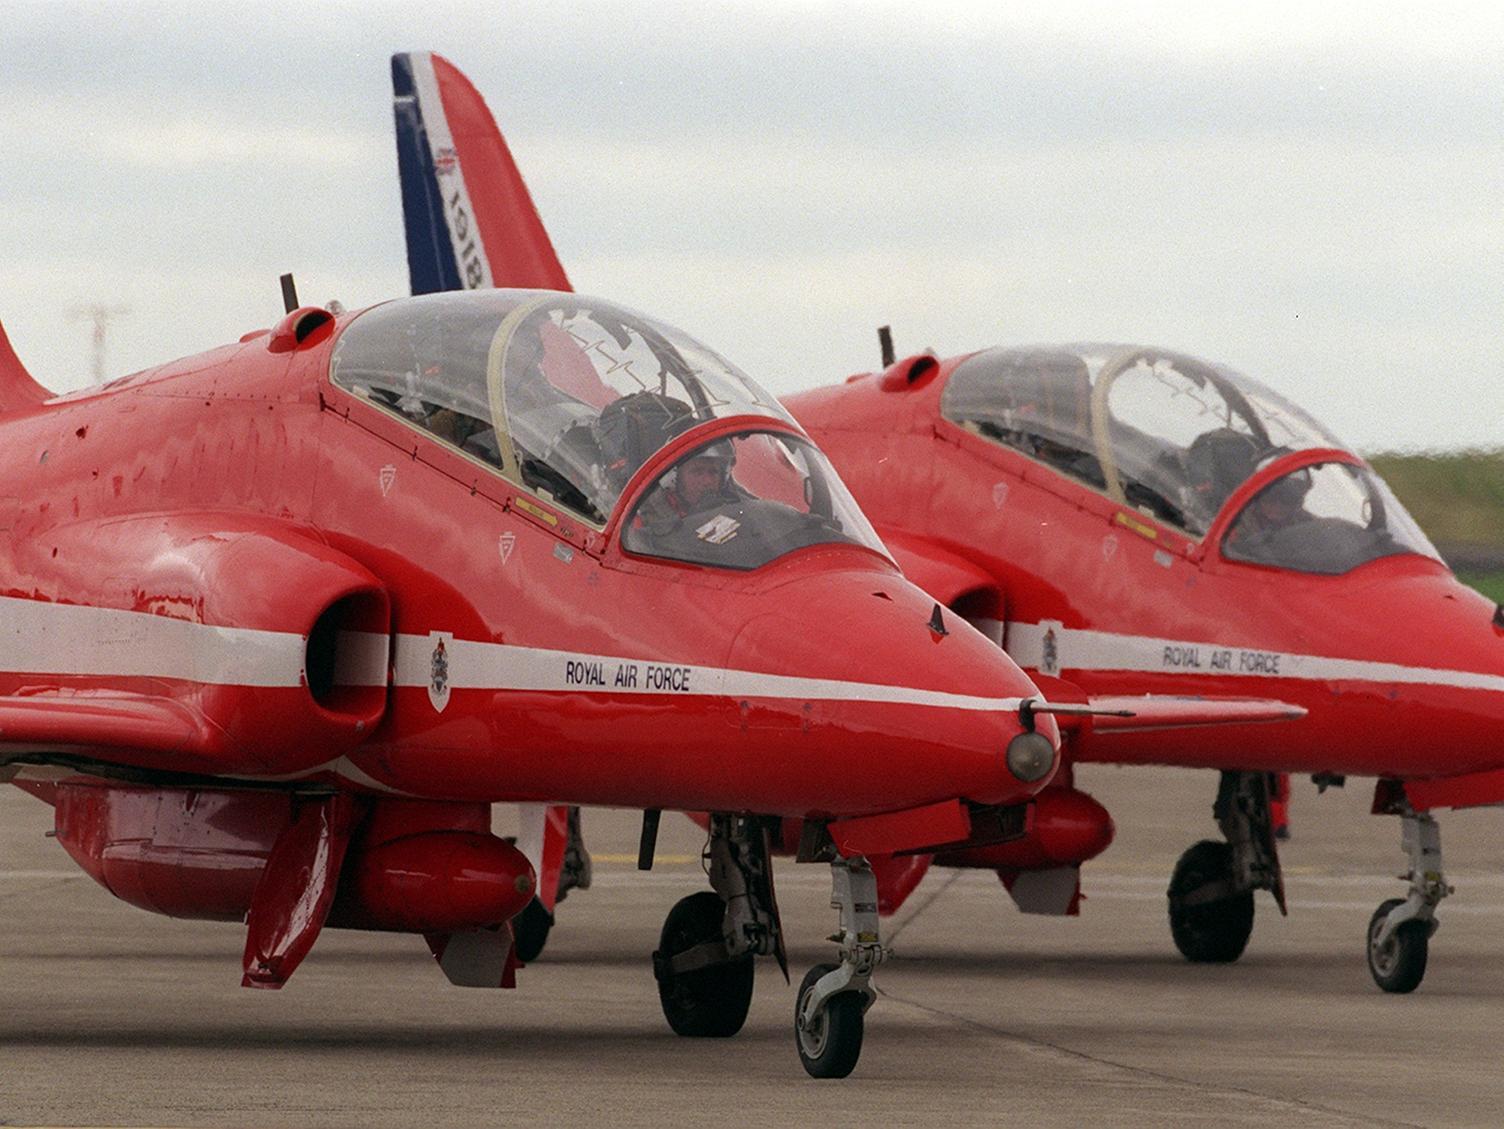 The Red Arrows at Leeds Bradford Airport.